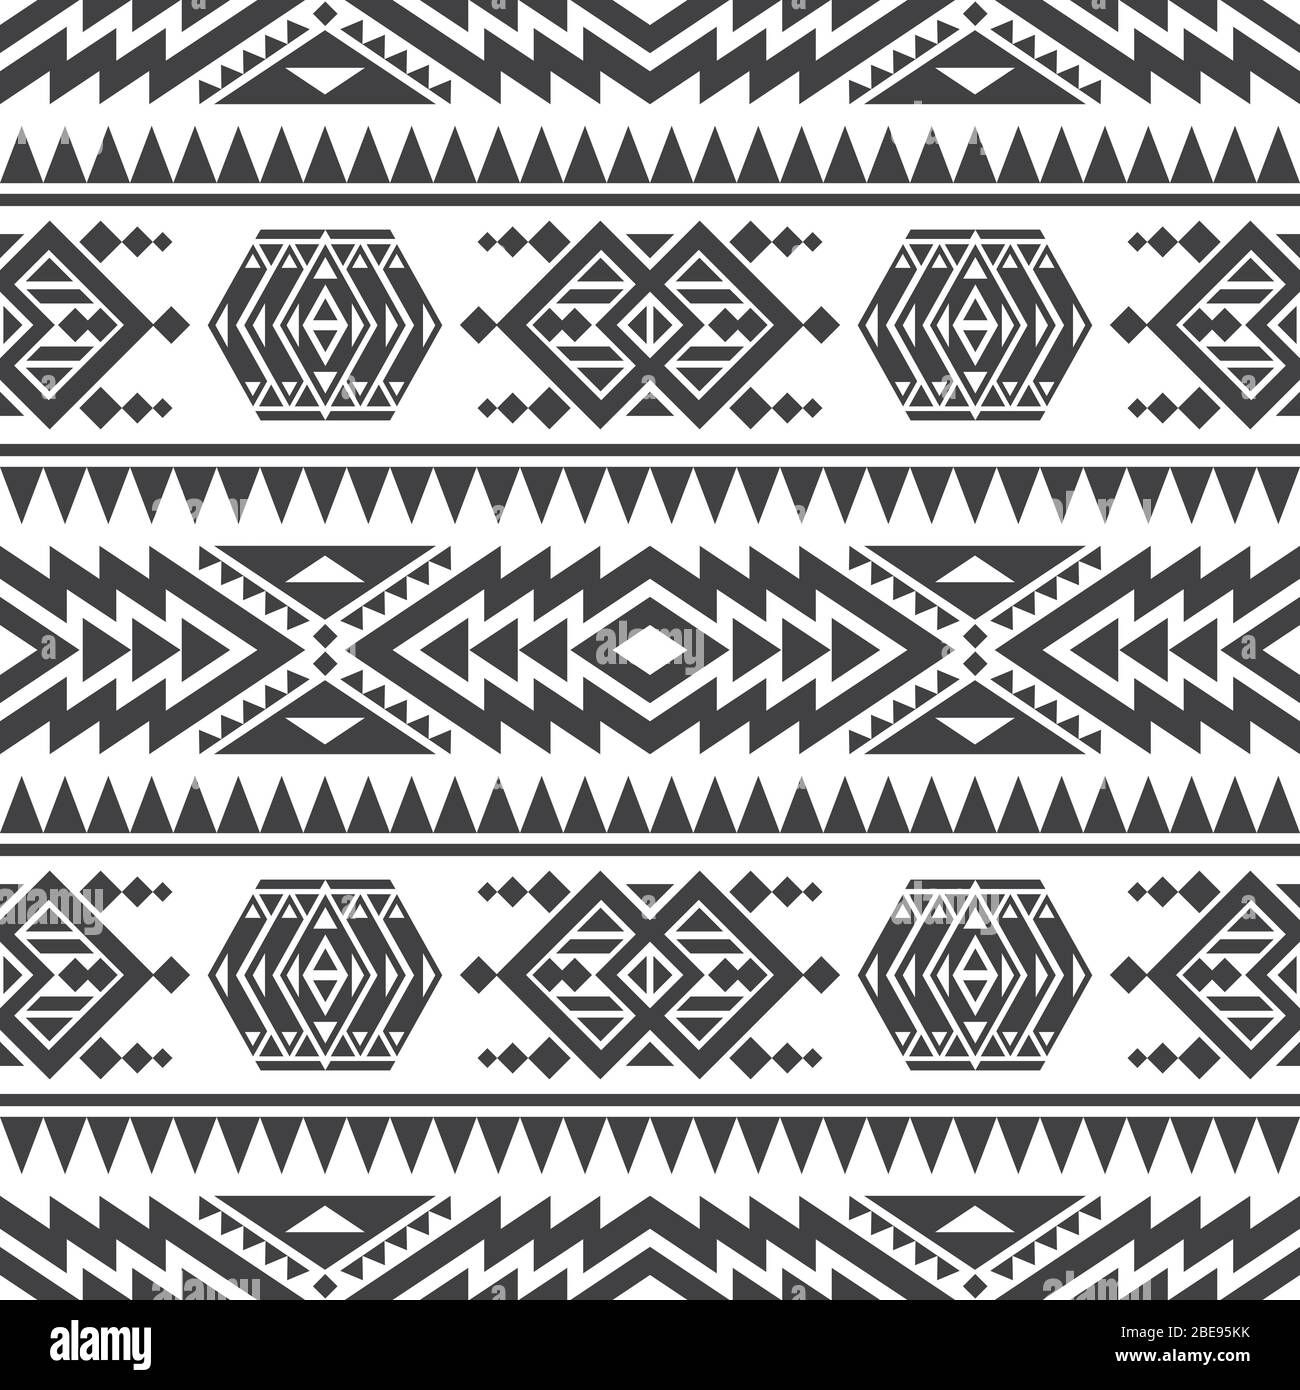 American aztec vector seamless texture. Native tribal indian repetitive pattern. Seamless mexican navajo geometric pattern illustration Stock Vector